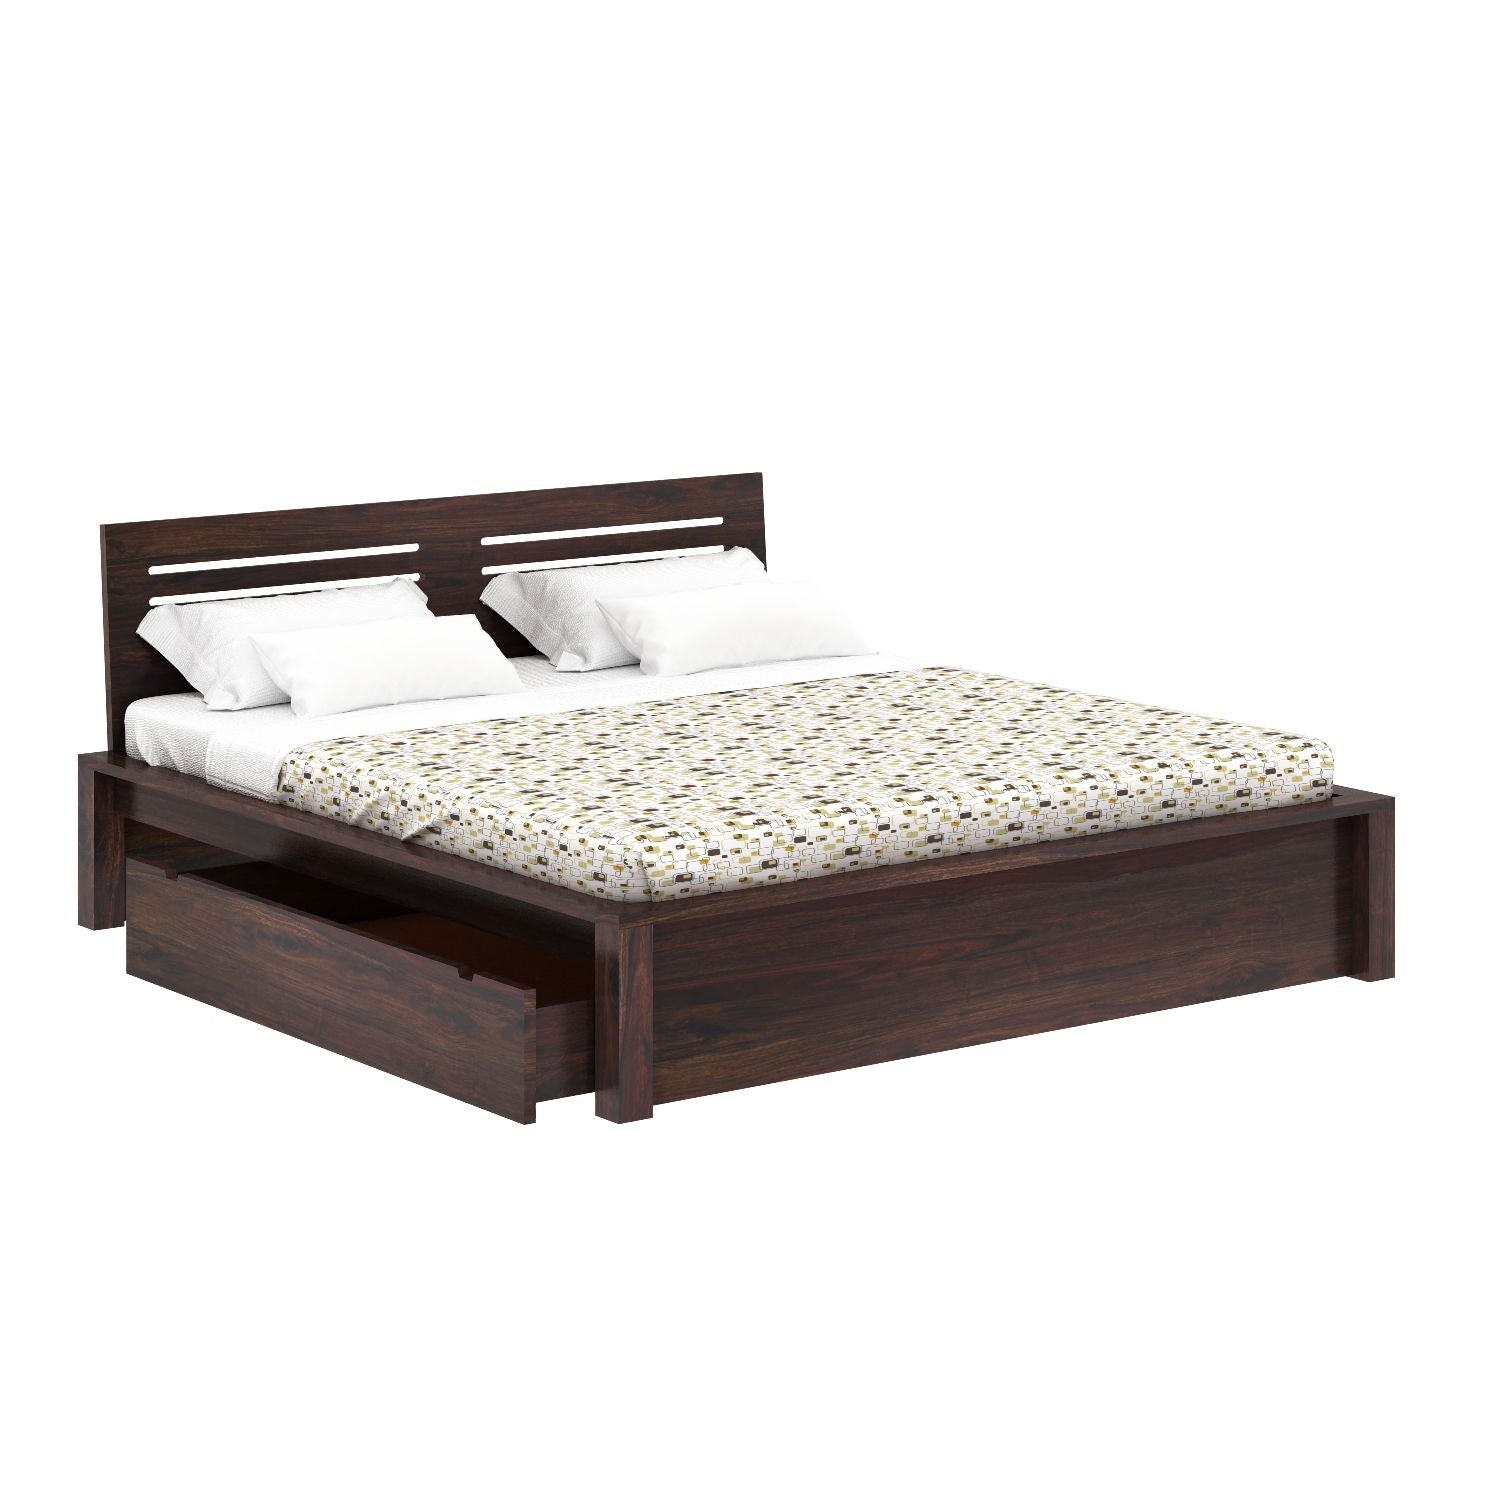 Due Solid Sheesham Wood Bed With Two Drawers (Queen Size, Walnut Finish)